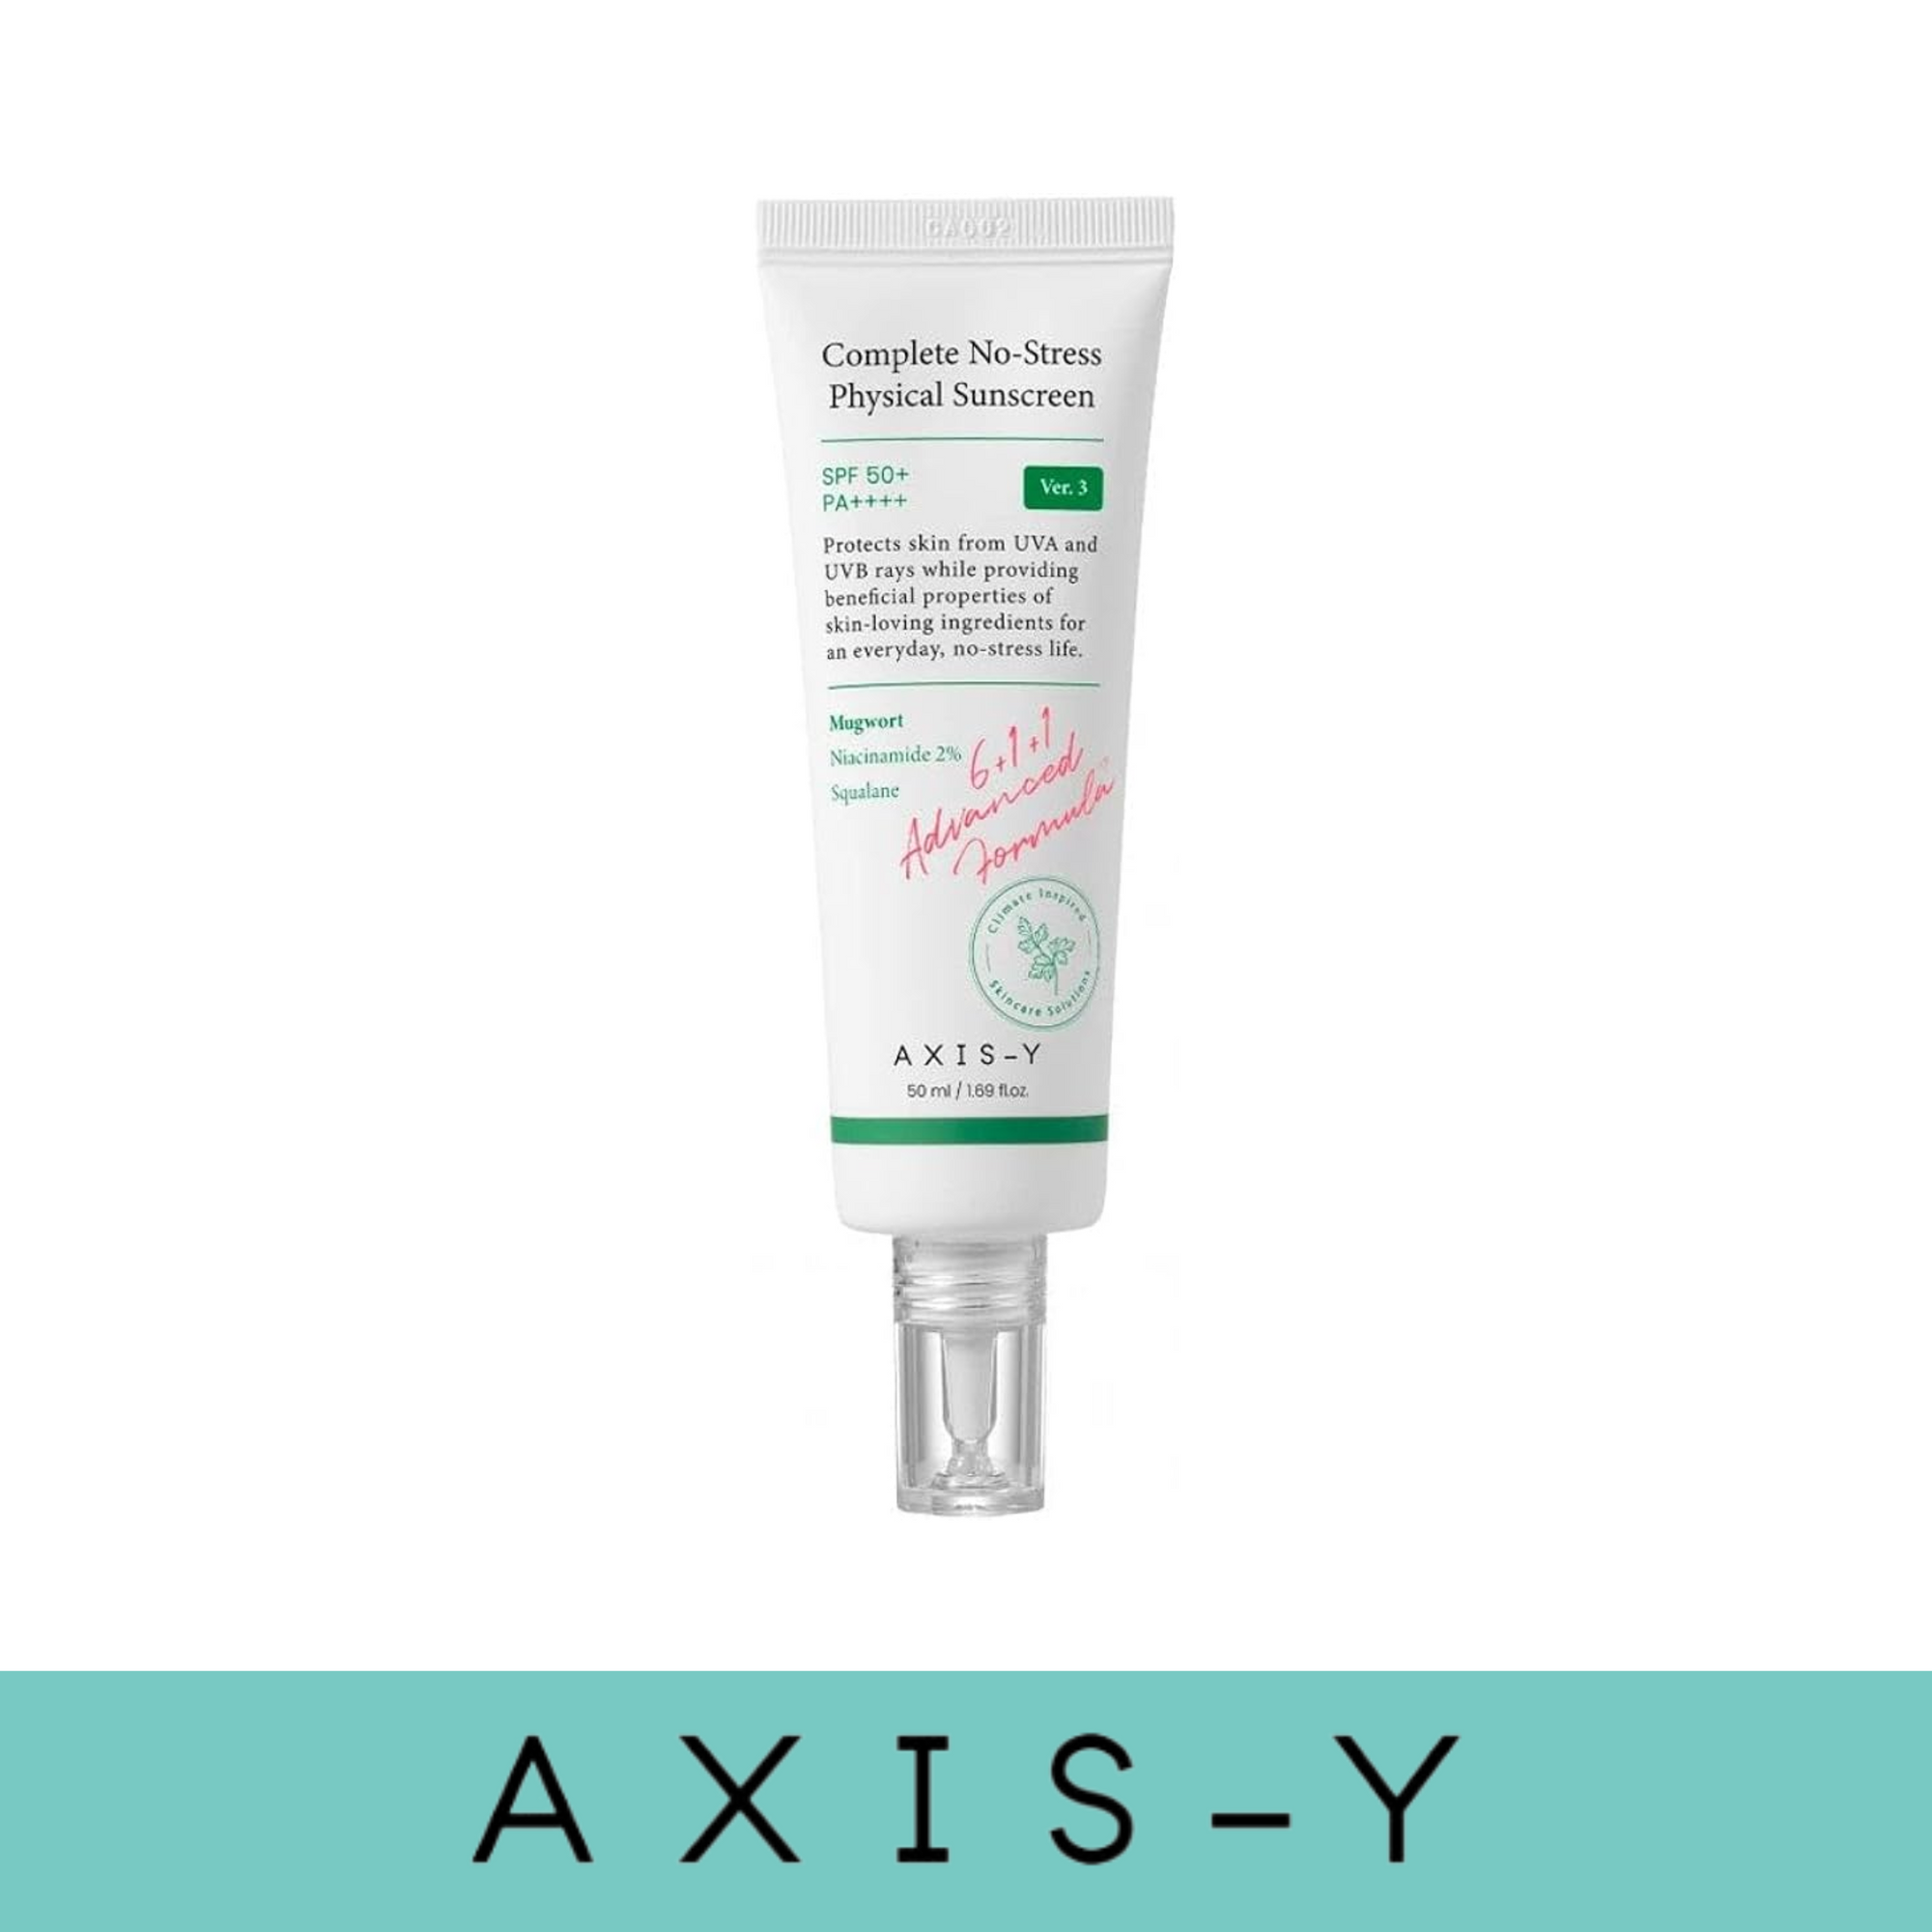 AXIS-Y Complete No-Stress Physical Sunscreen 50mL